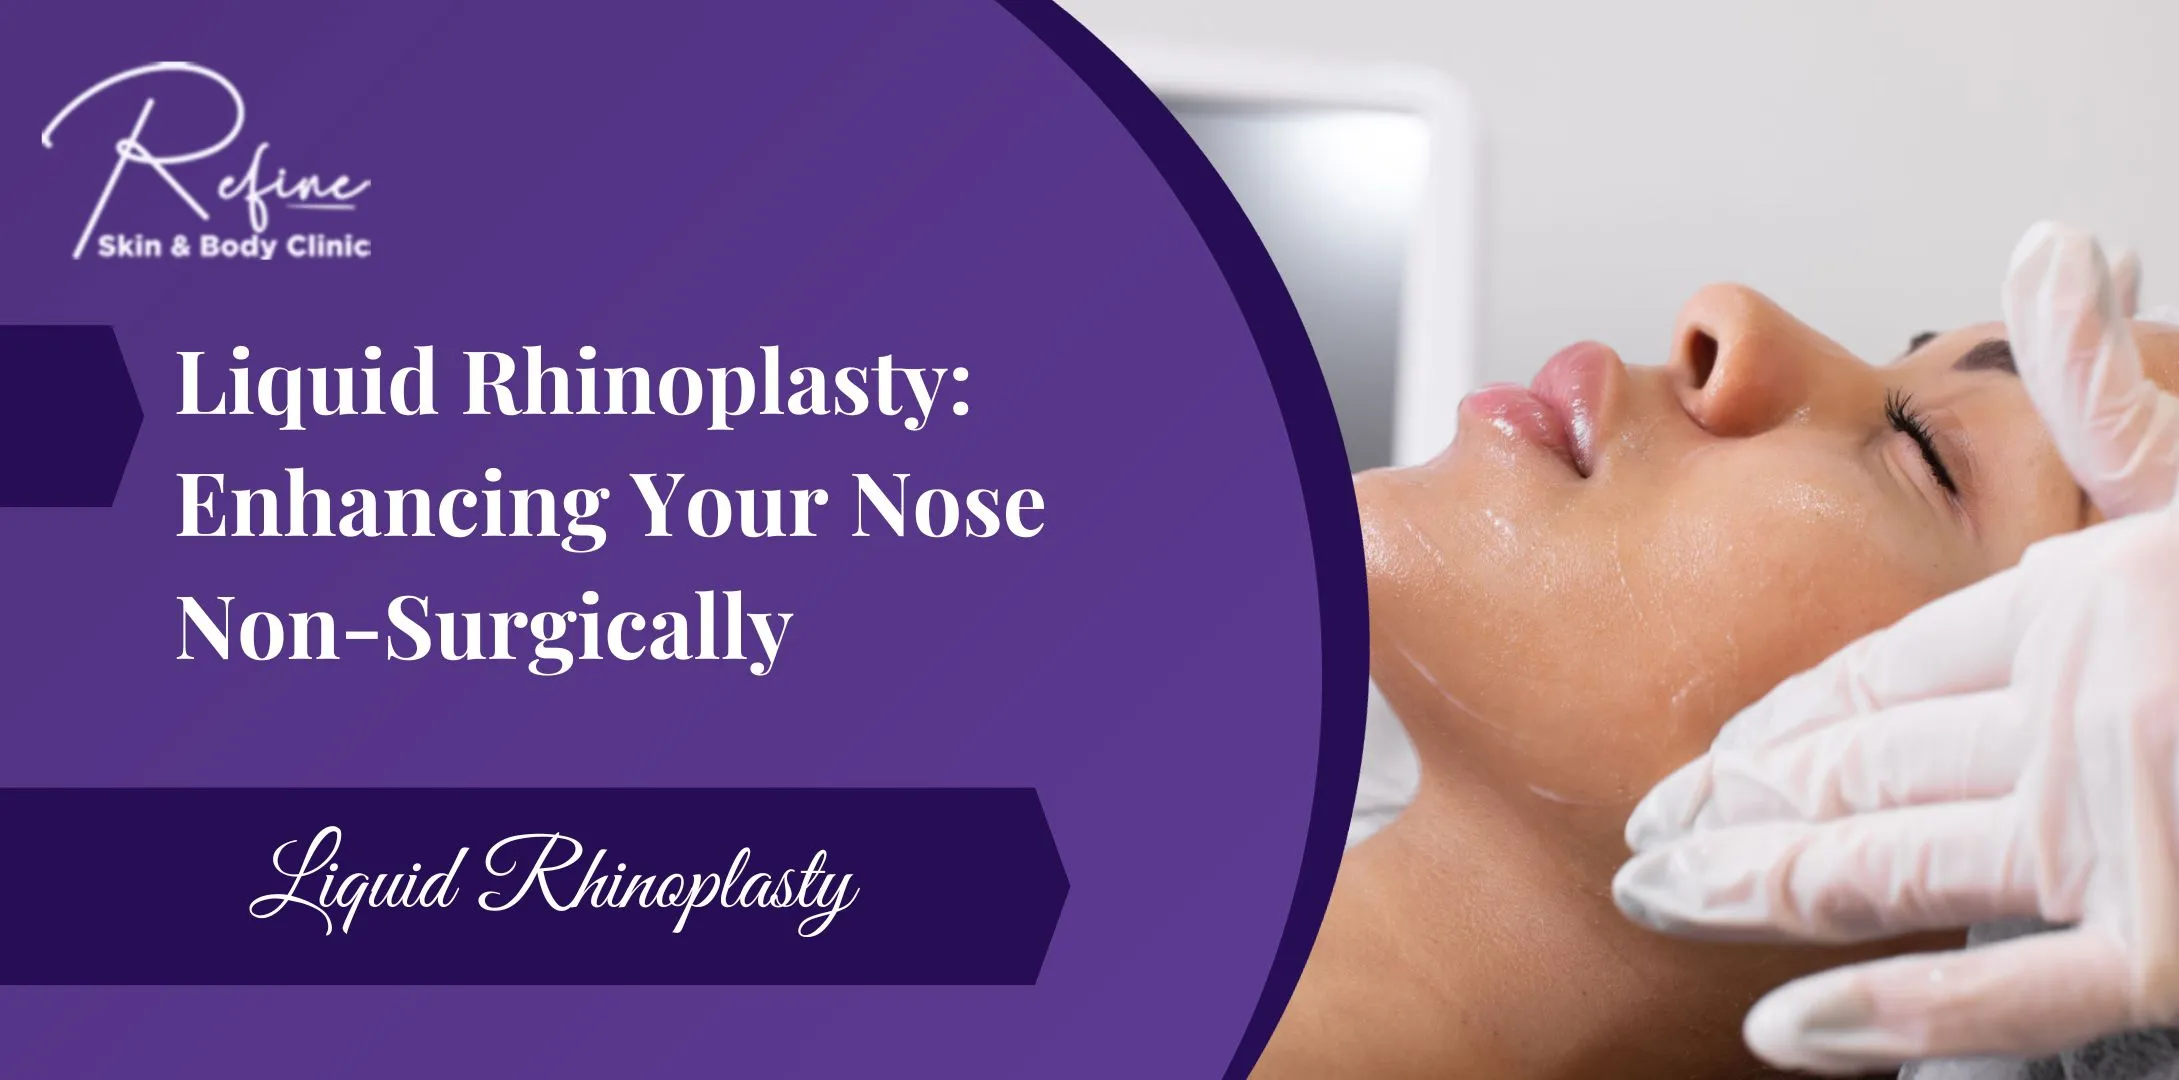 Liquid Rhinoplasty: Enhancing Your Nose Non-Surgically